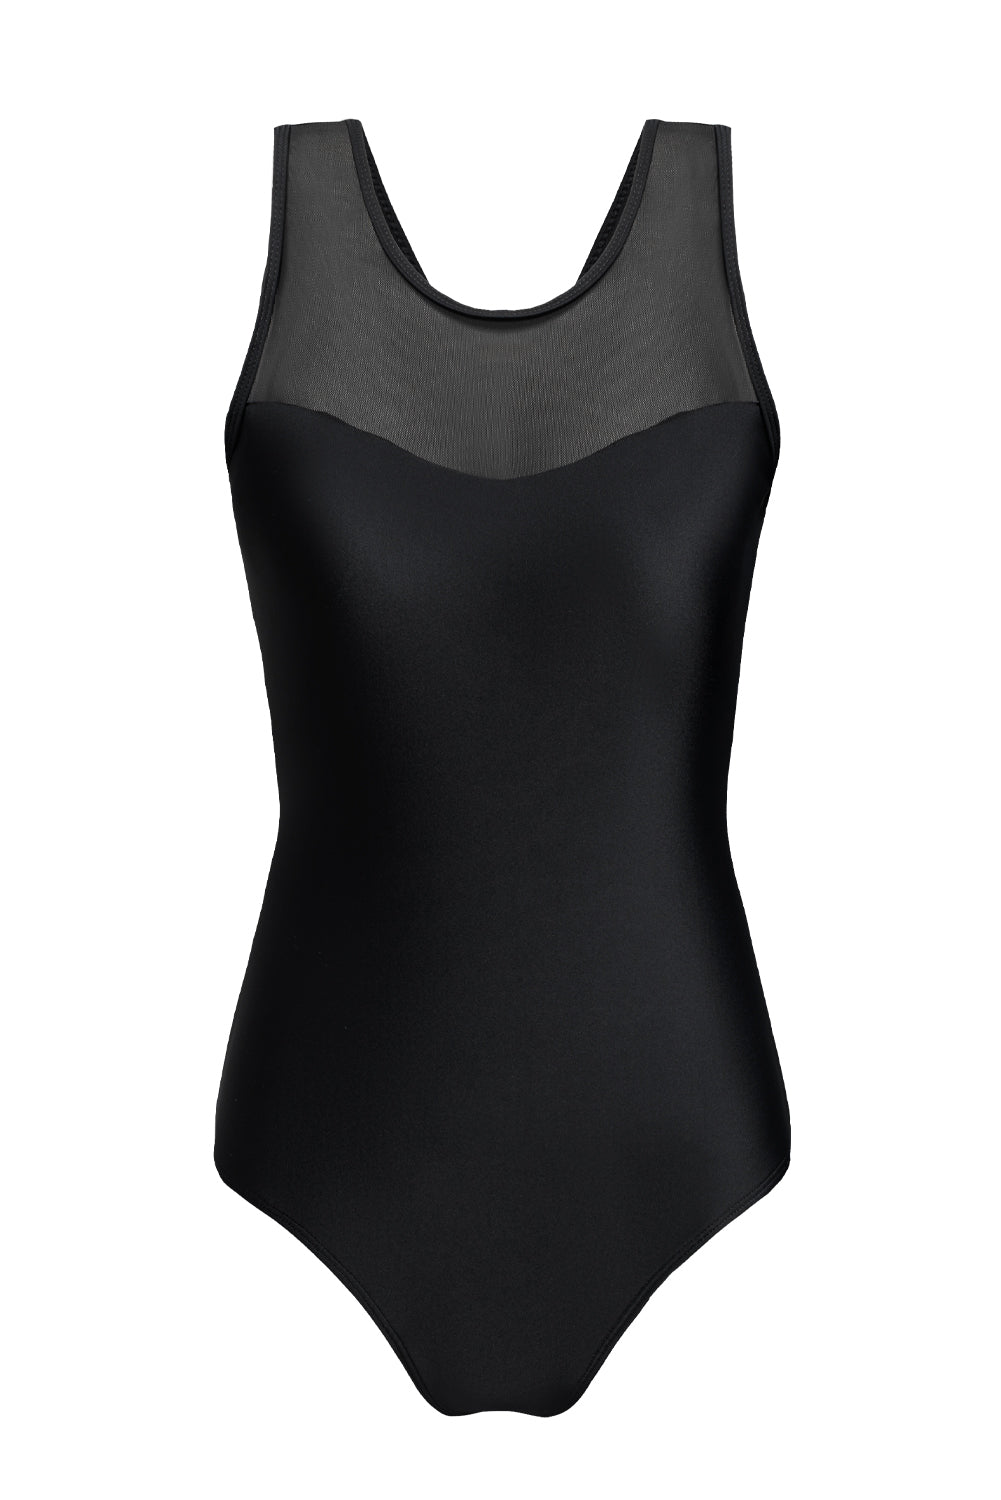 Black Hollow Out Back Mesh High Leg One Piece Swimsuit